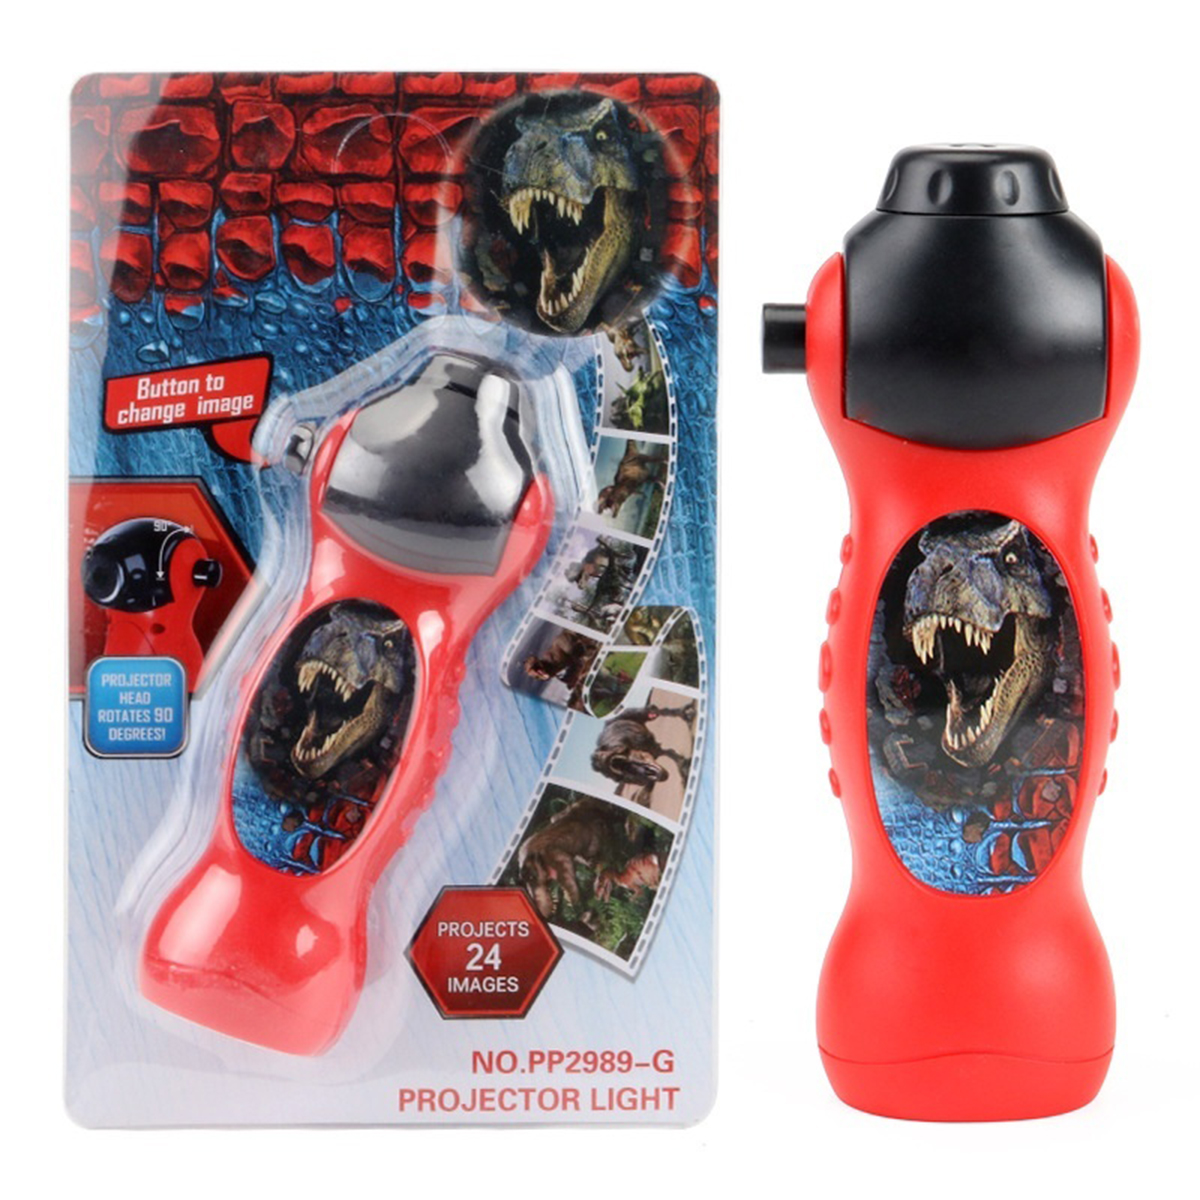 24-Dinosaur-Patterns-Flashlight-Projector-Lamp-Educational-Puzzle-Toy-Kids-Children-Christmas-Gift-1826552-3